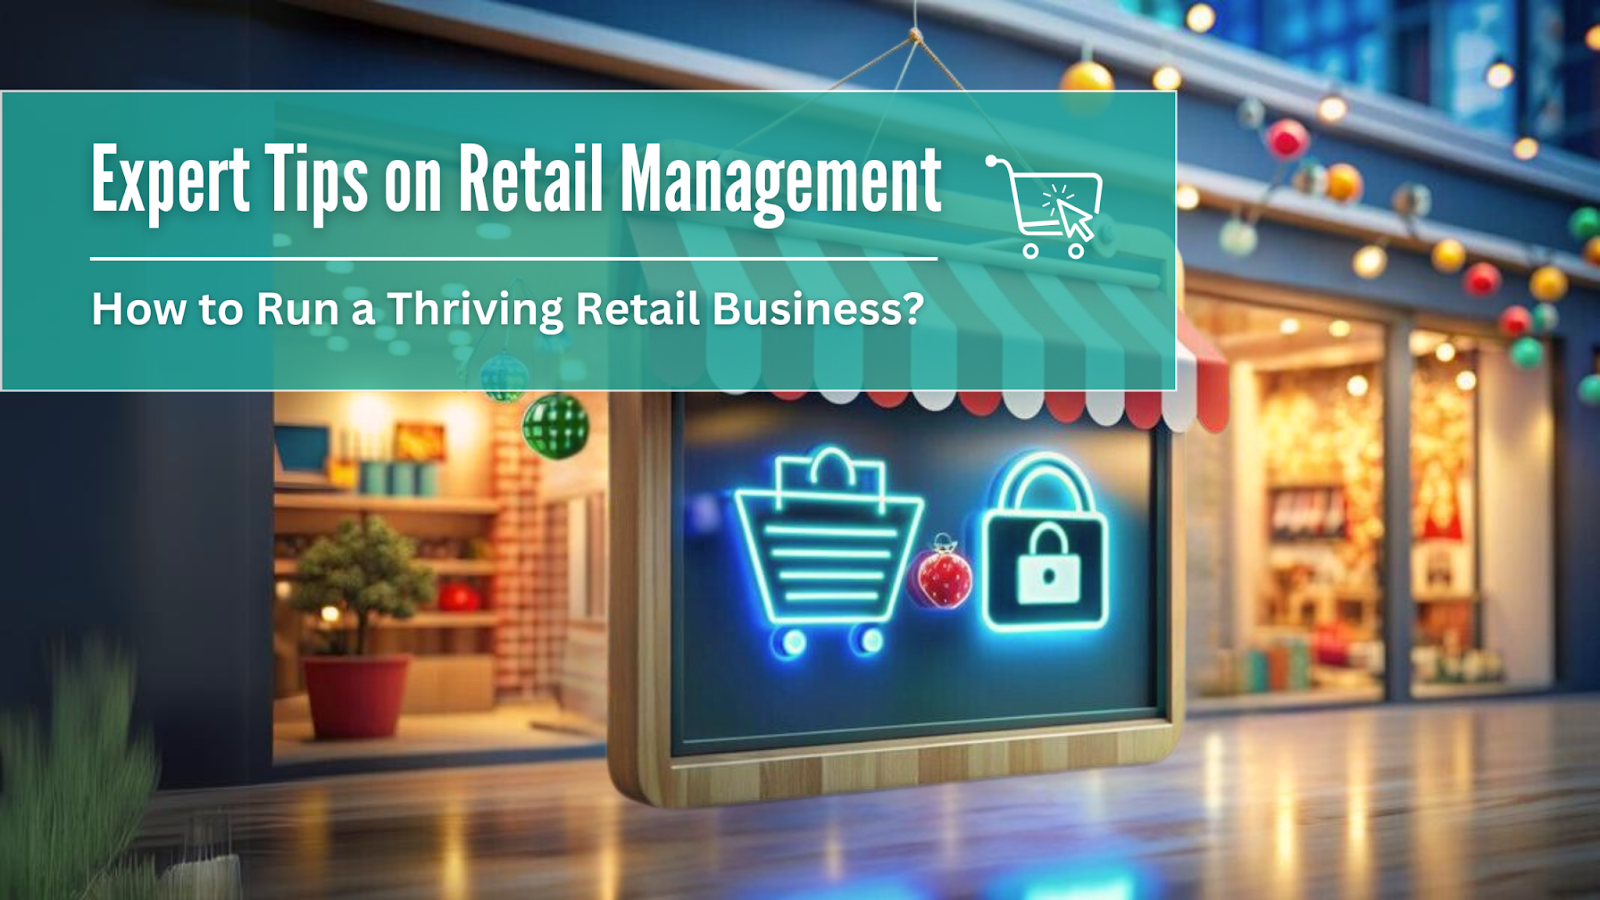 Tips on retail management